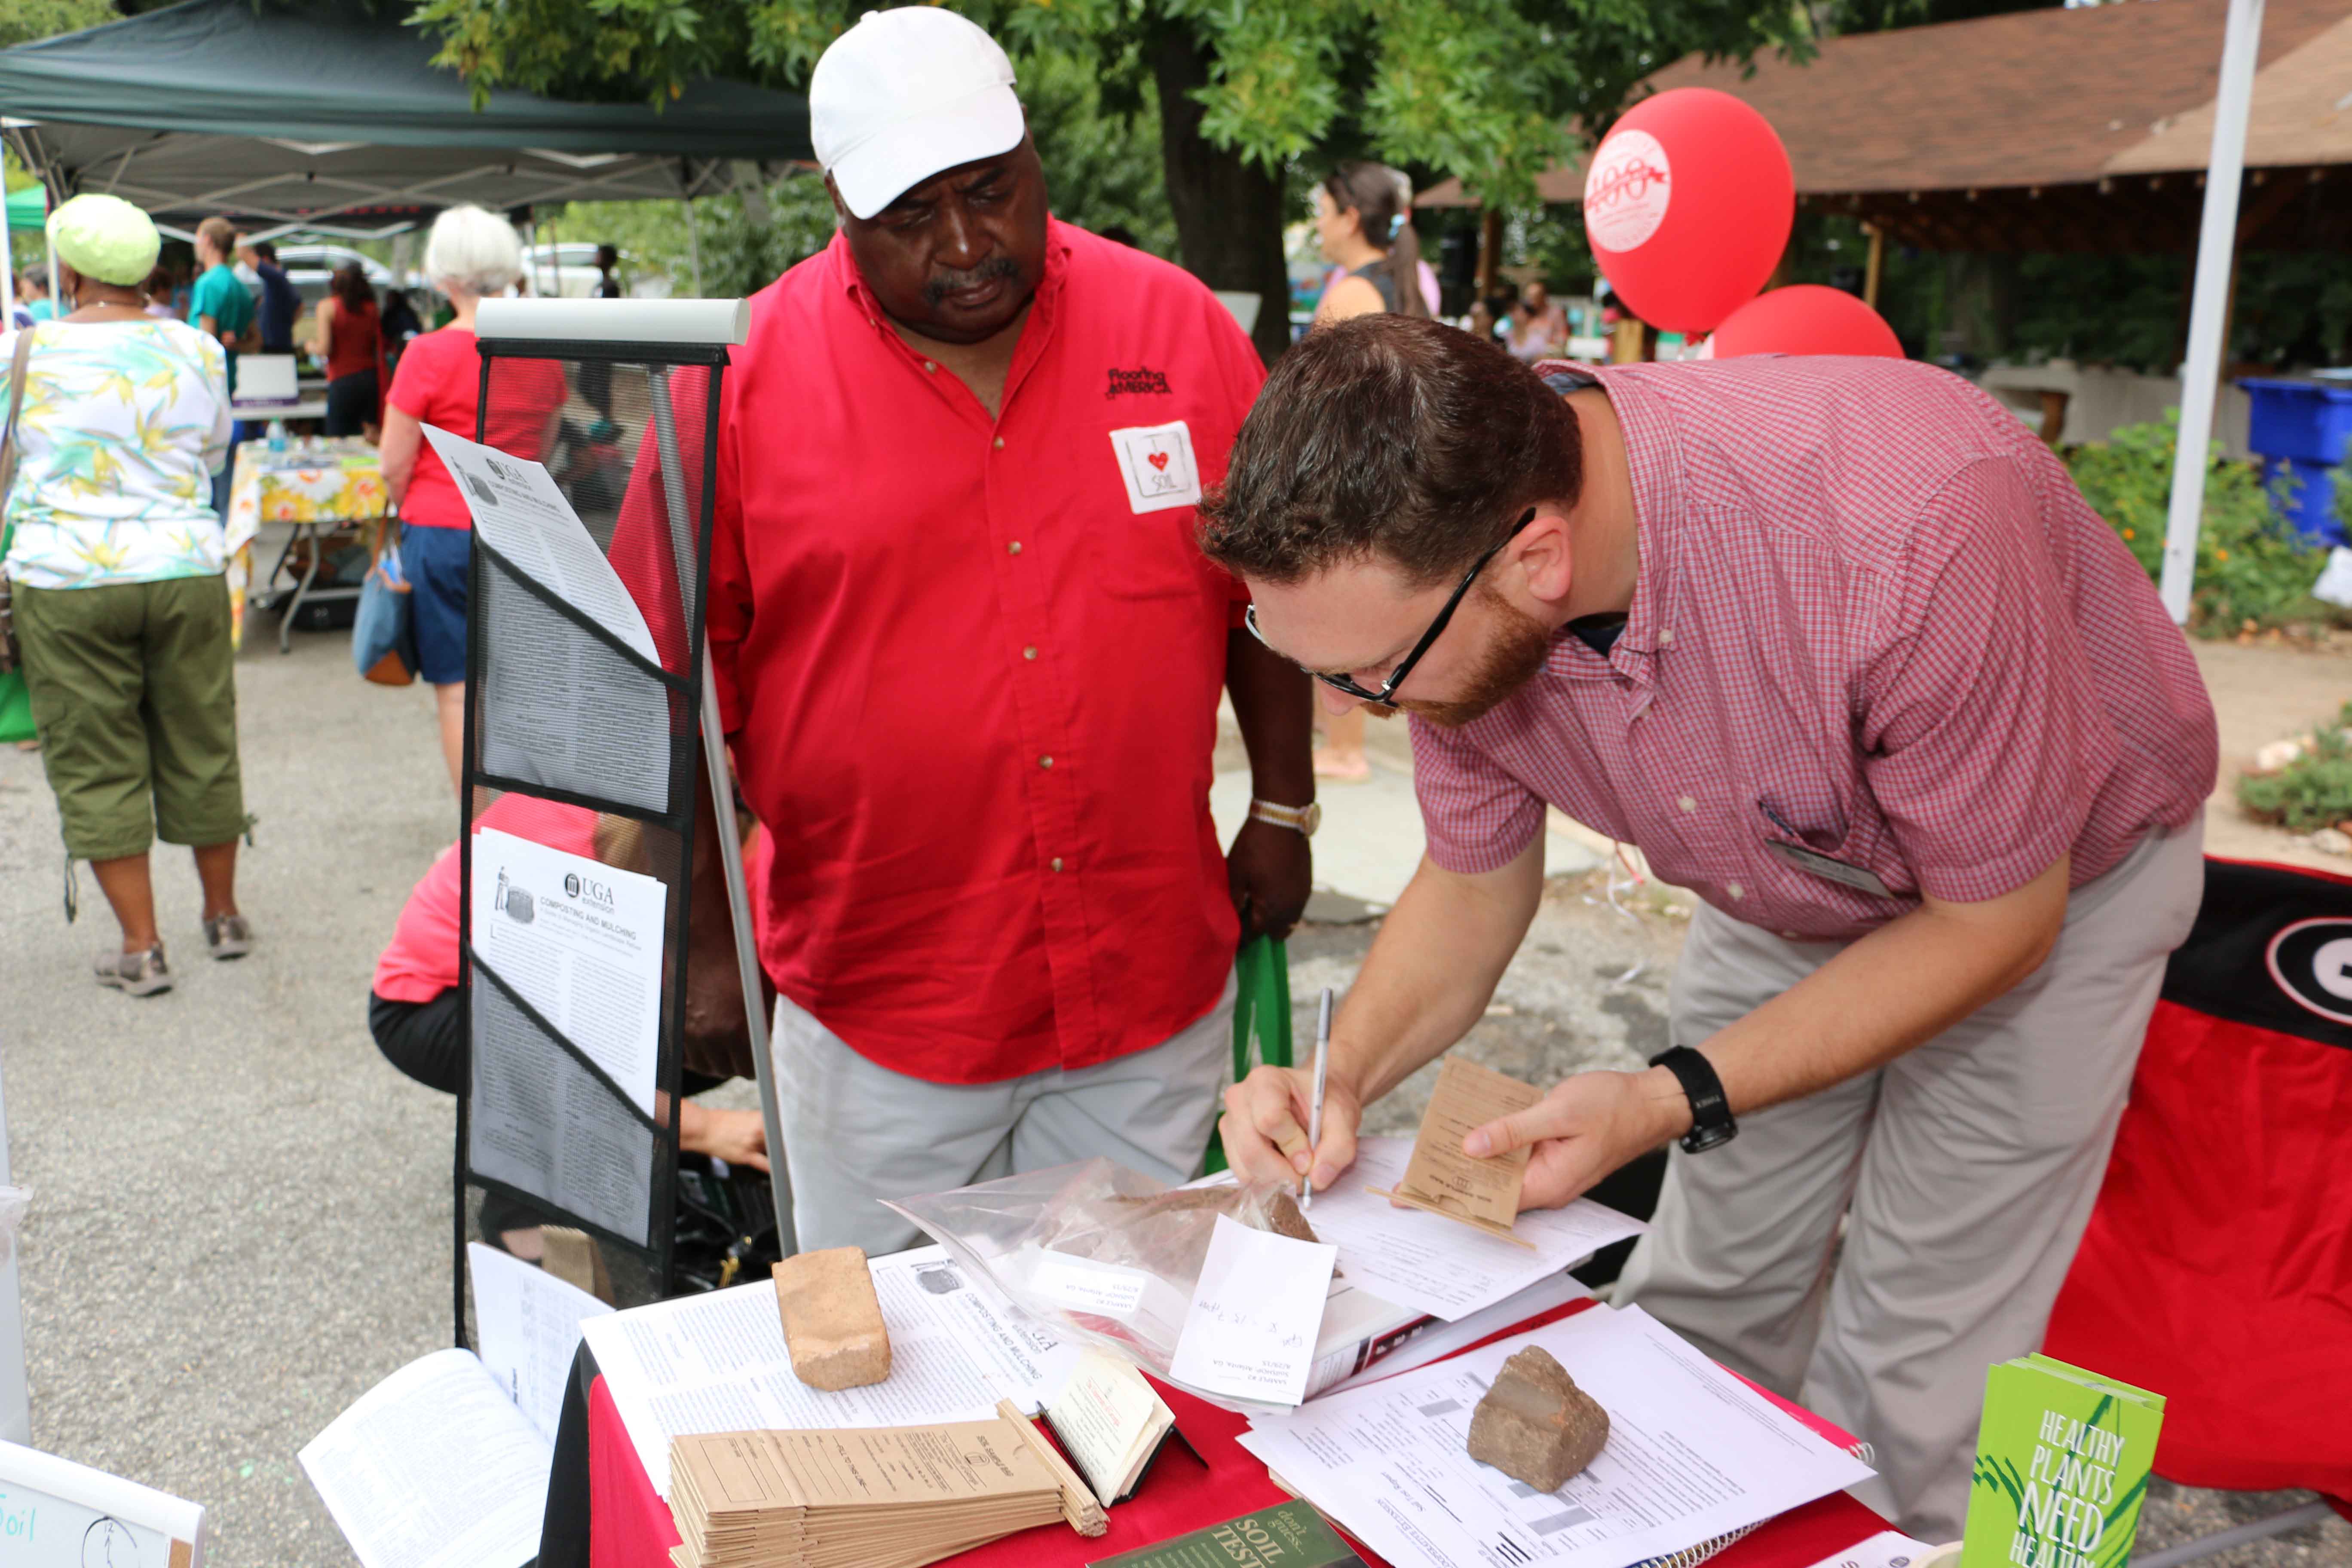 Calvin Sims, a community gardener from Lithonia, delivers a soil sample to UGA soil scientist Jason Lessl at the Healthy Soil, Healthy Community festival.